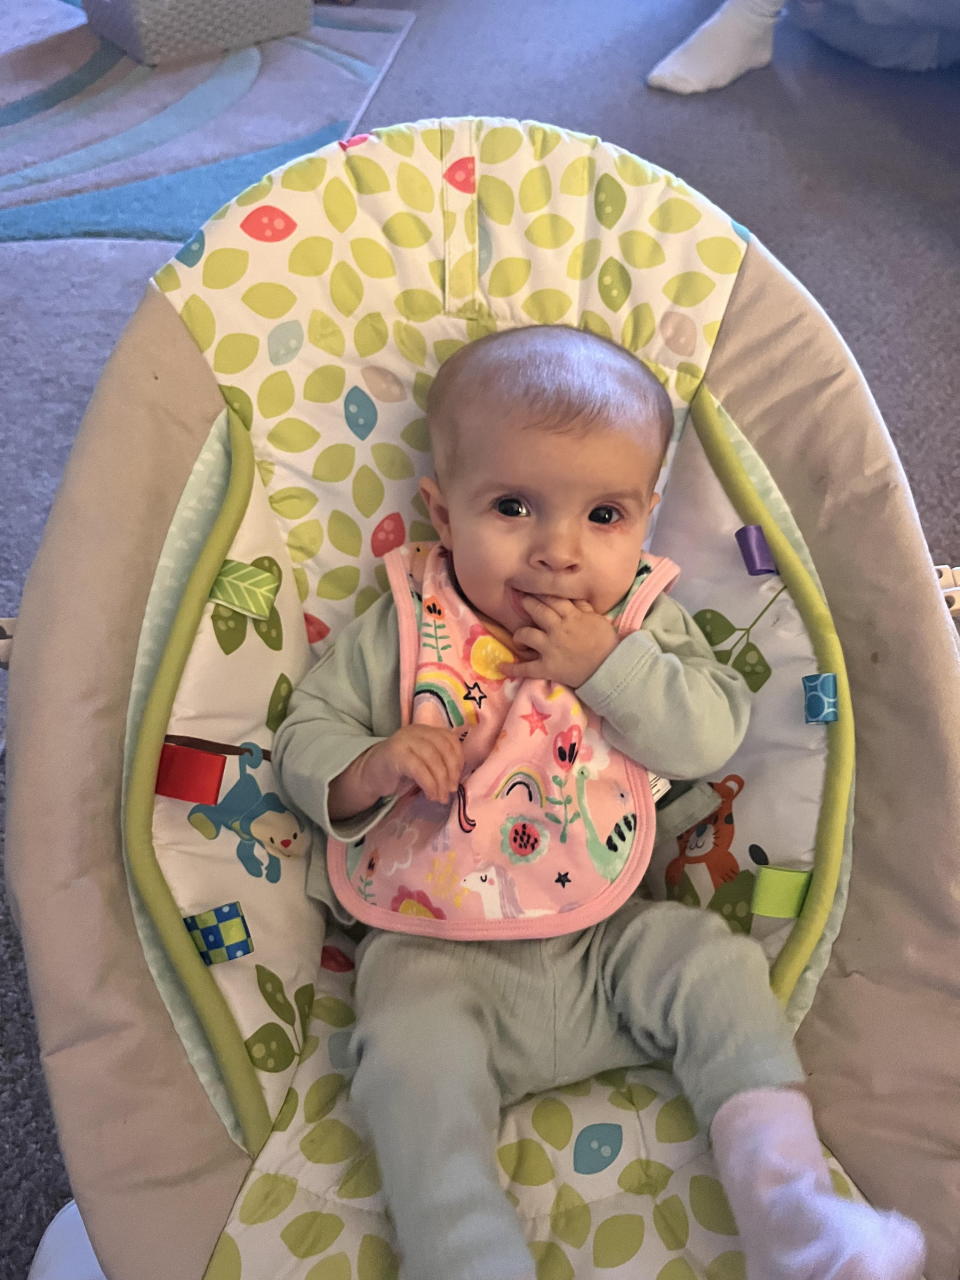 Ava-Rose's parents say she's now recovering at home. (Charlotte Lake/SWNS)
